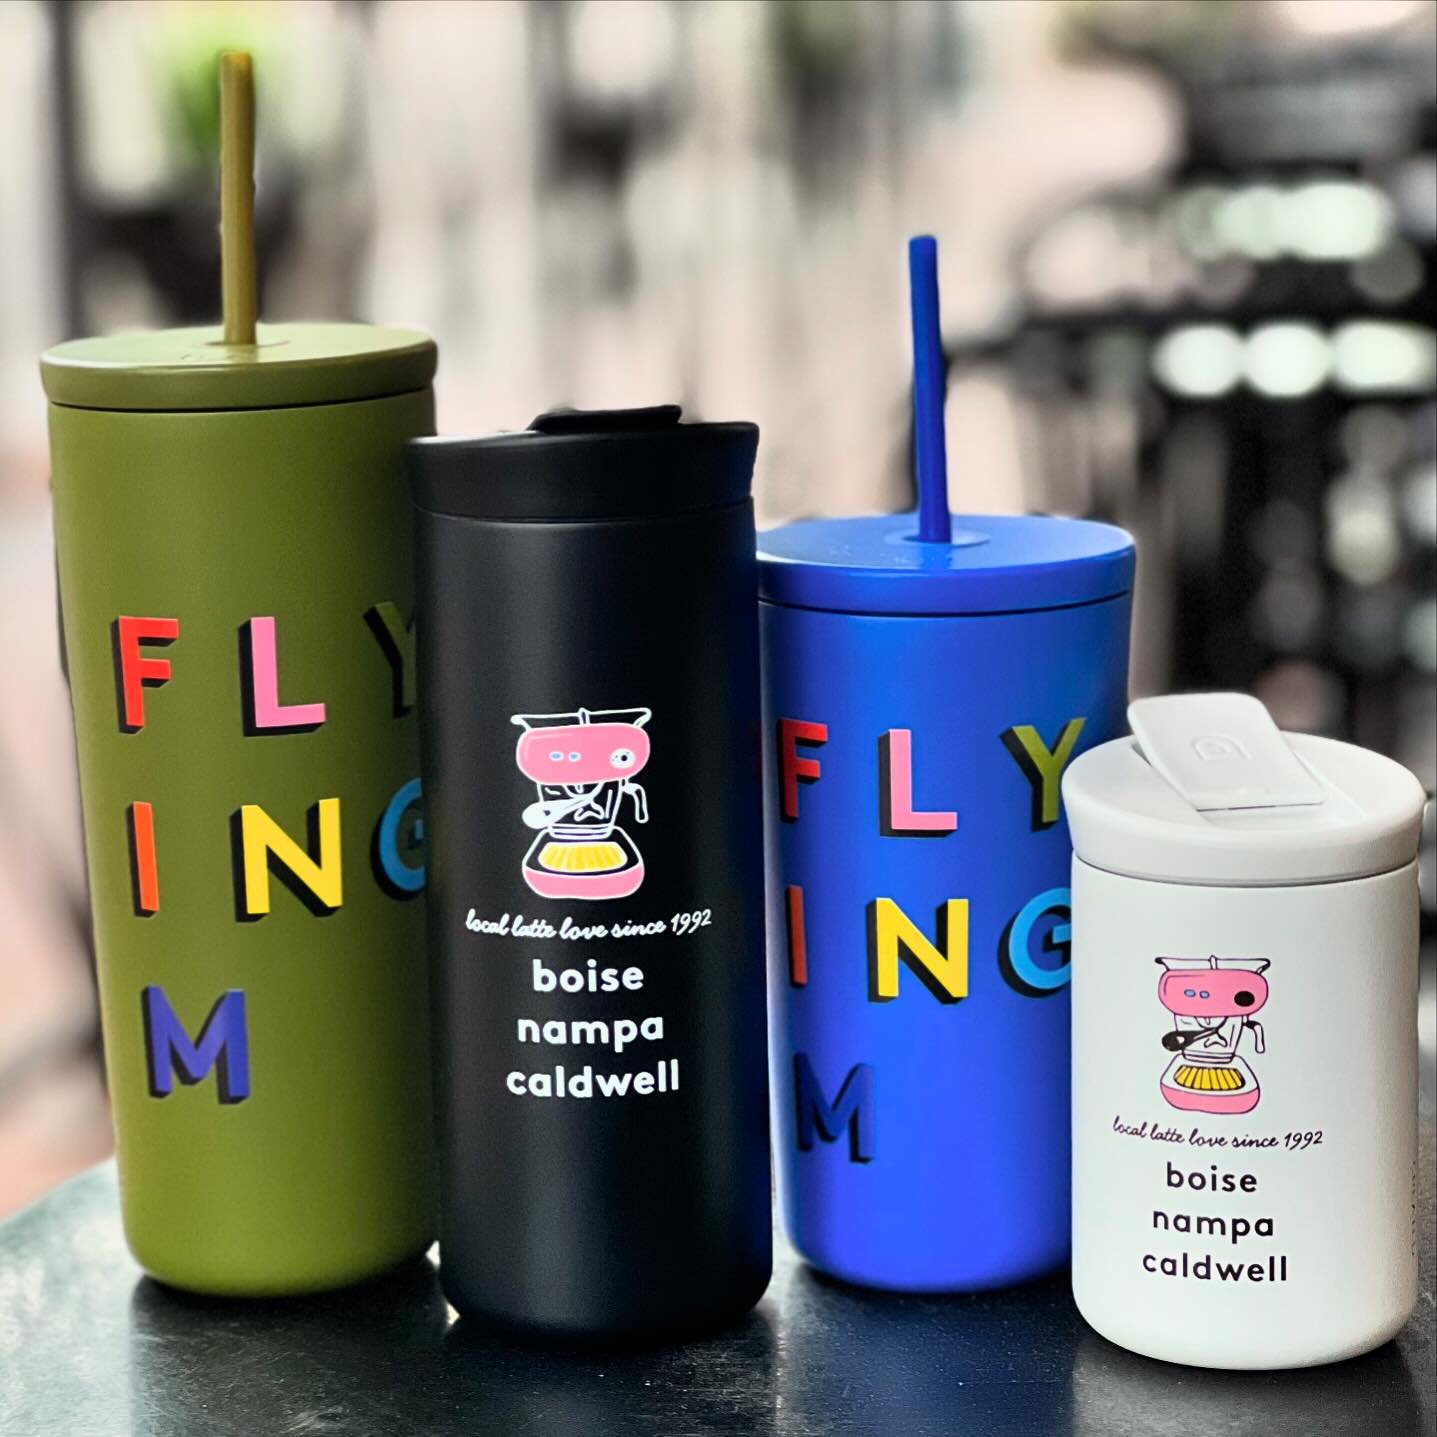 New Flying M Travel Mugs and Cold Cups are in stock now! They&rsquo;re stainless steel, double walled and vacuum insulated to keep your drink hot or cold! ❤️ #flyingmboise #flyingm #downtownboise